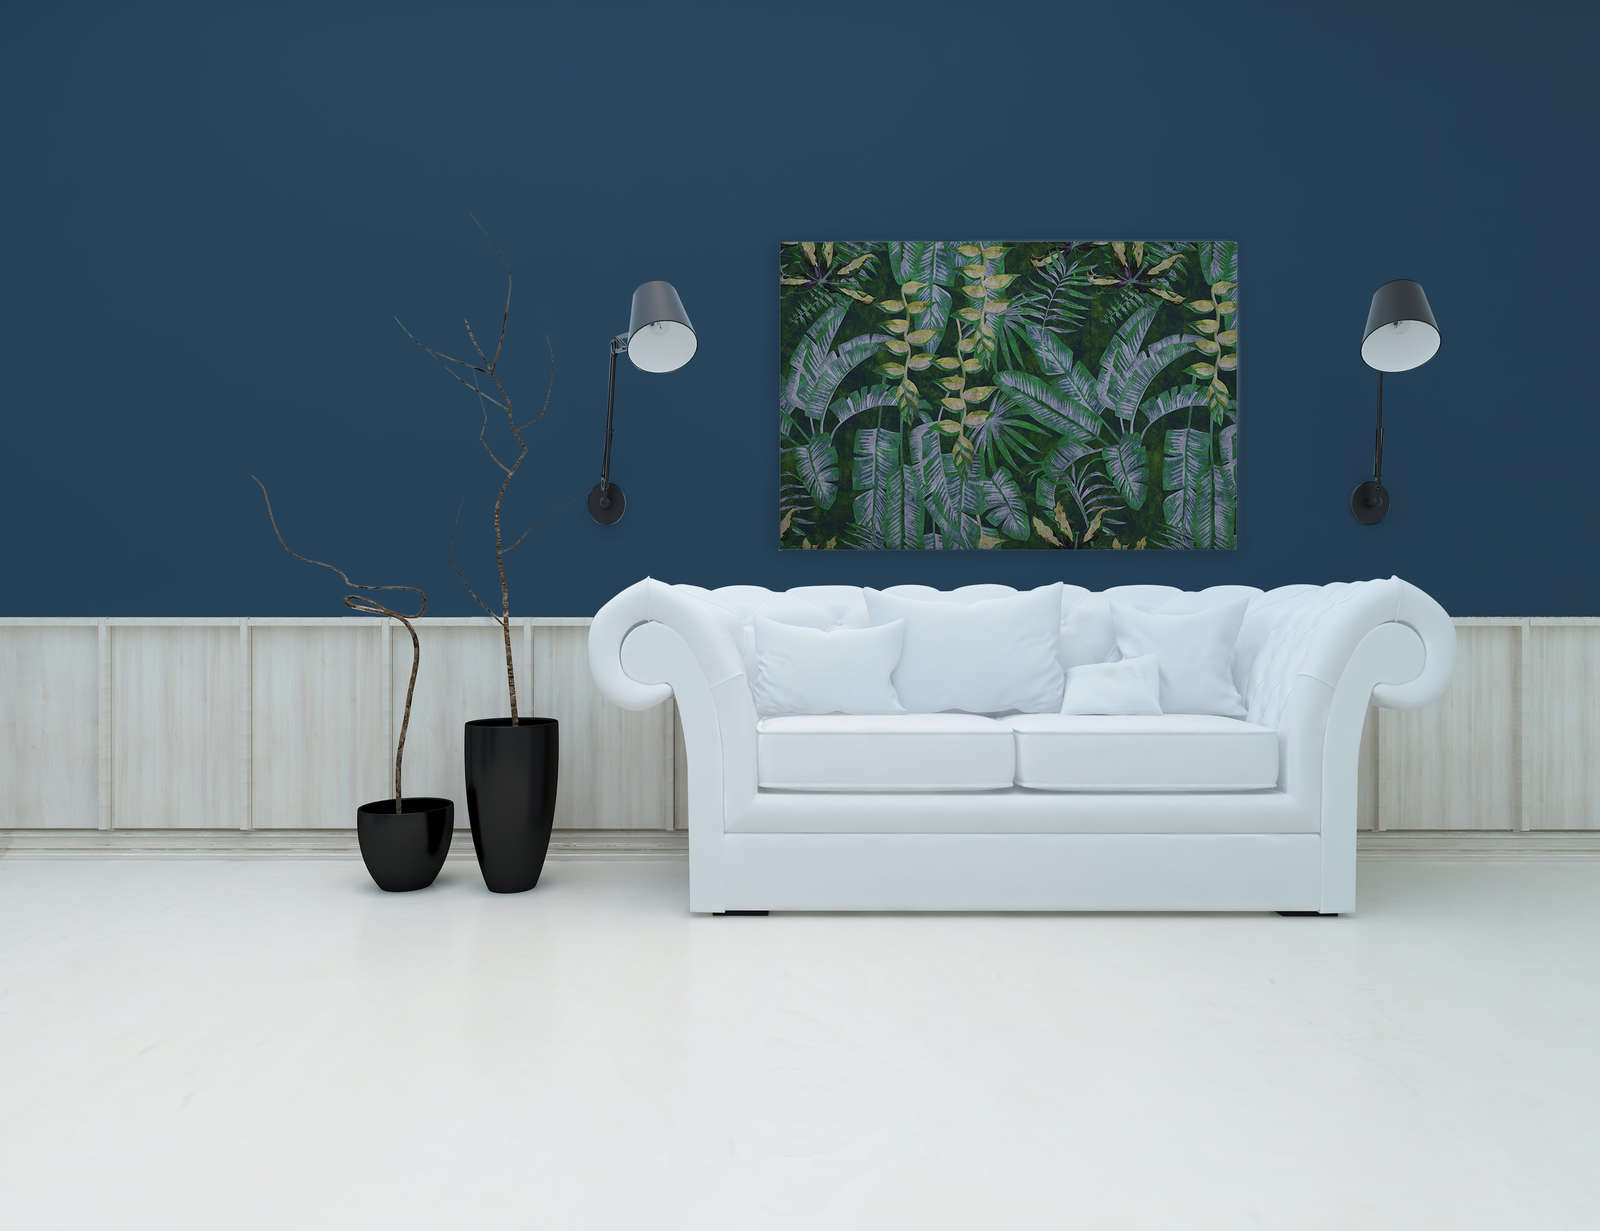             Tropicana 2 - Canvas painting with tropical plants - 1.20 m x 0.80 m
        